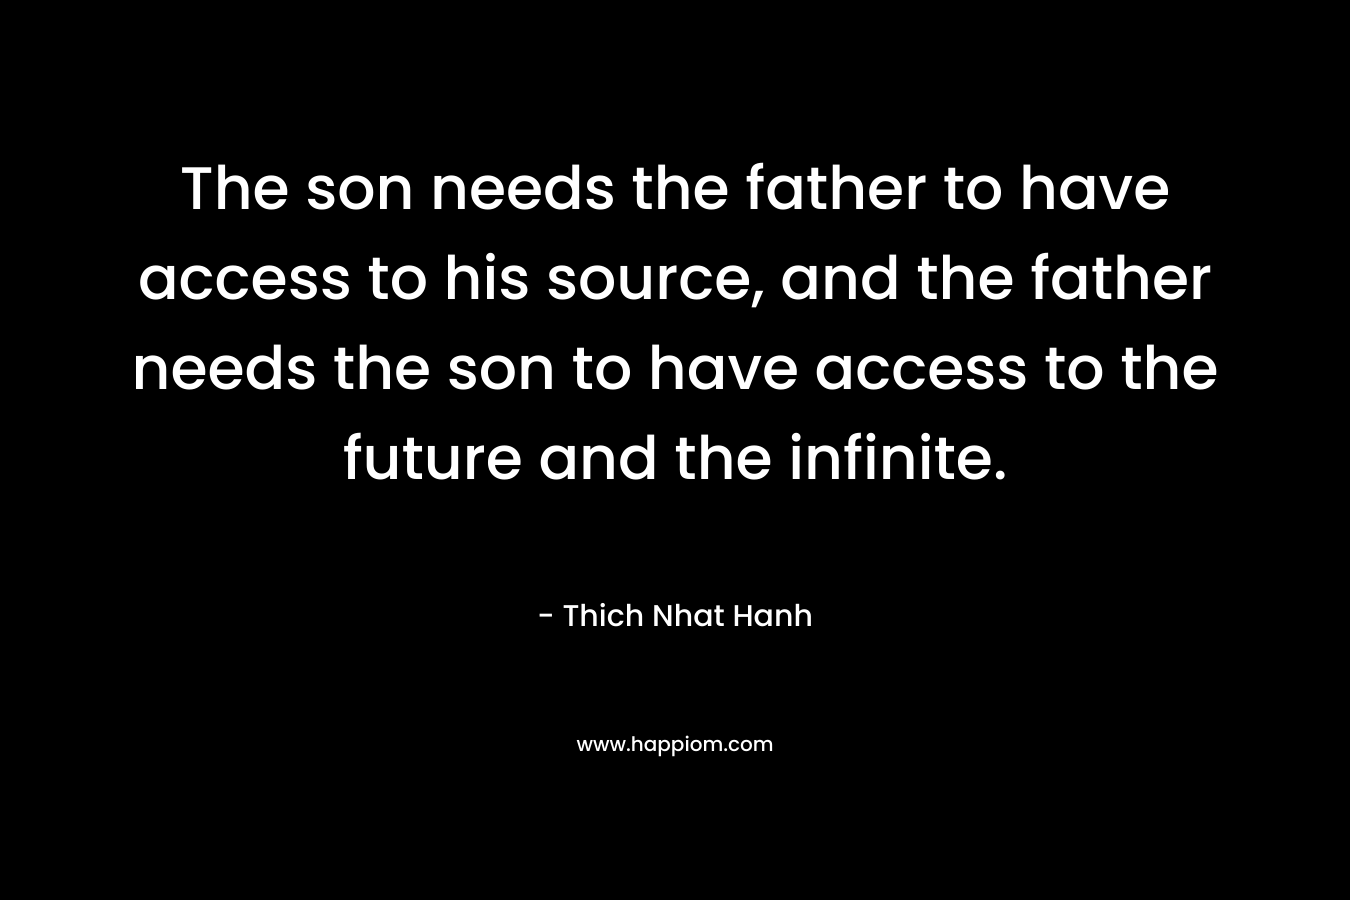 The son needs the father to have access to his source, and the father needs the son to have access to the future and the infinite.